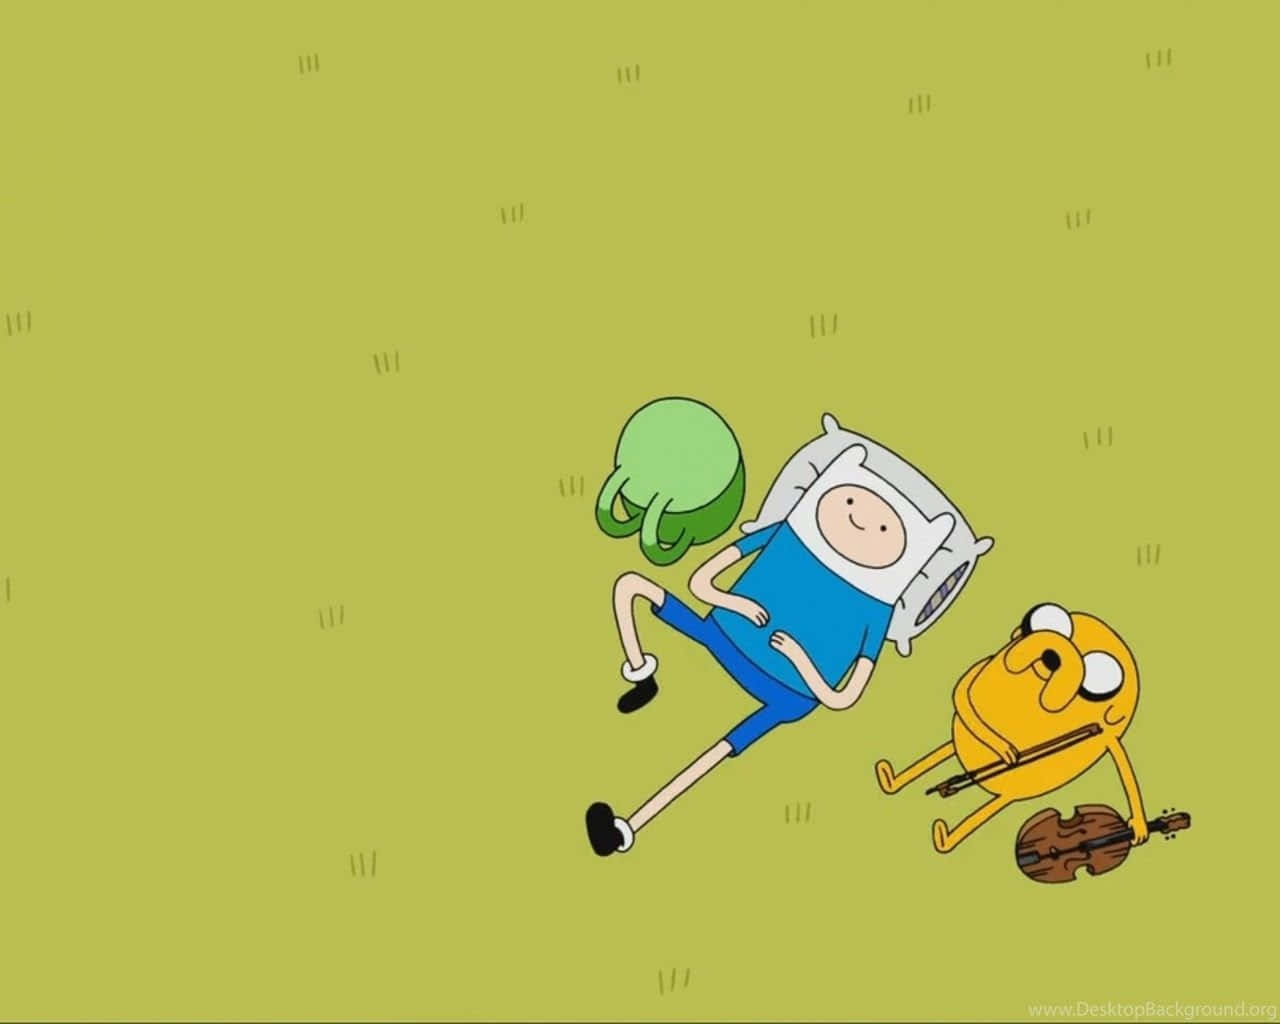 Finn and Jake are the stars of Adventure Time, a popular animated TV show. - 1280x1024